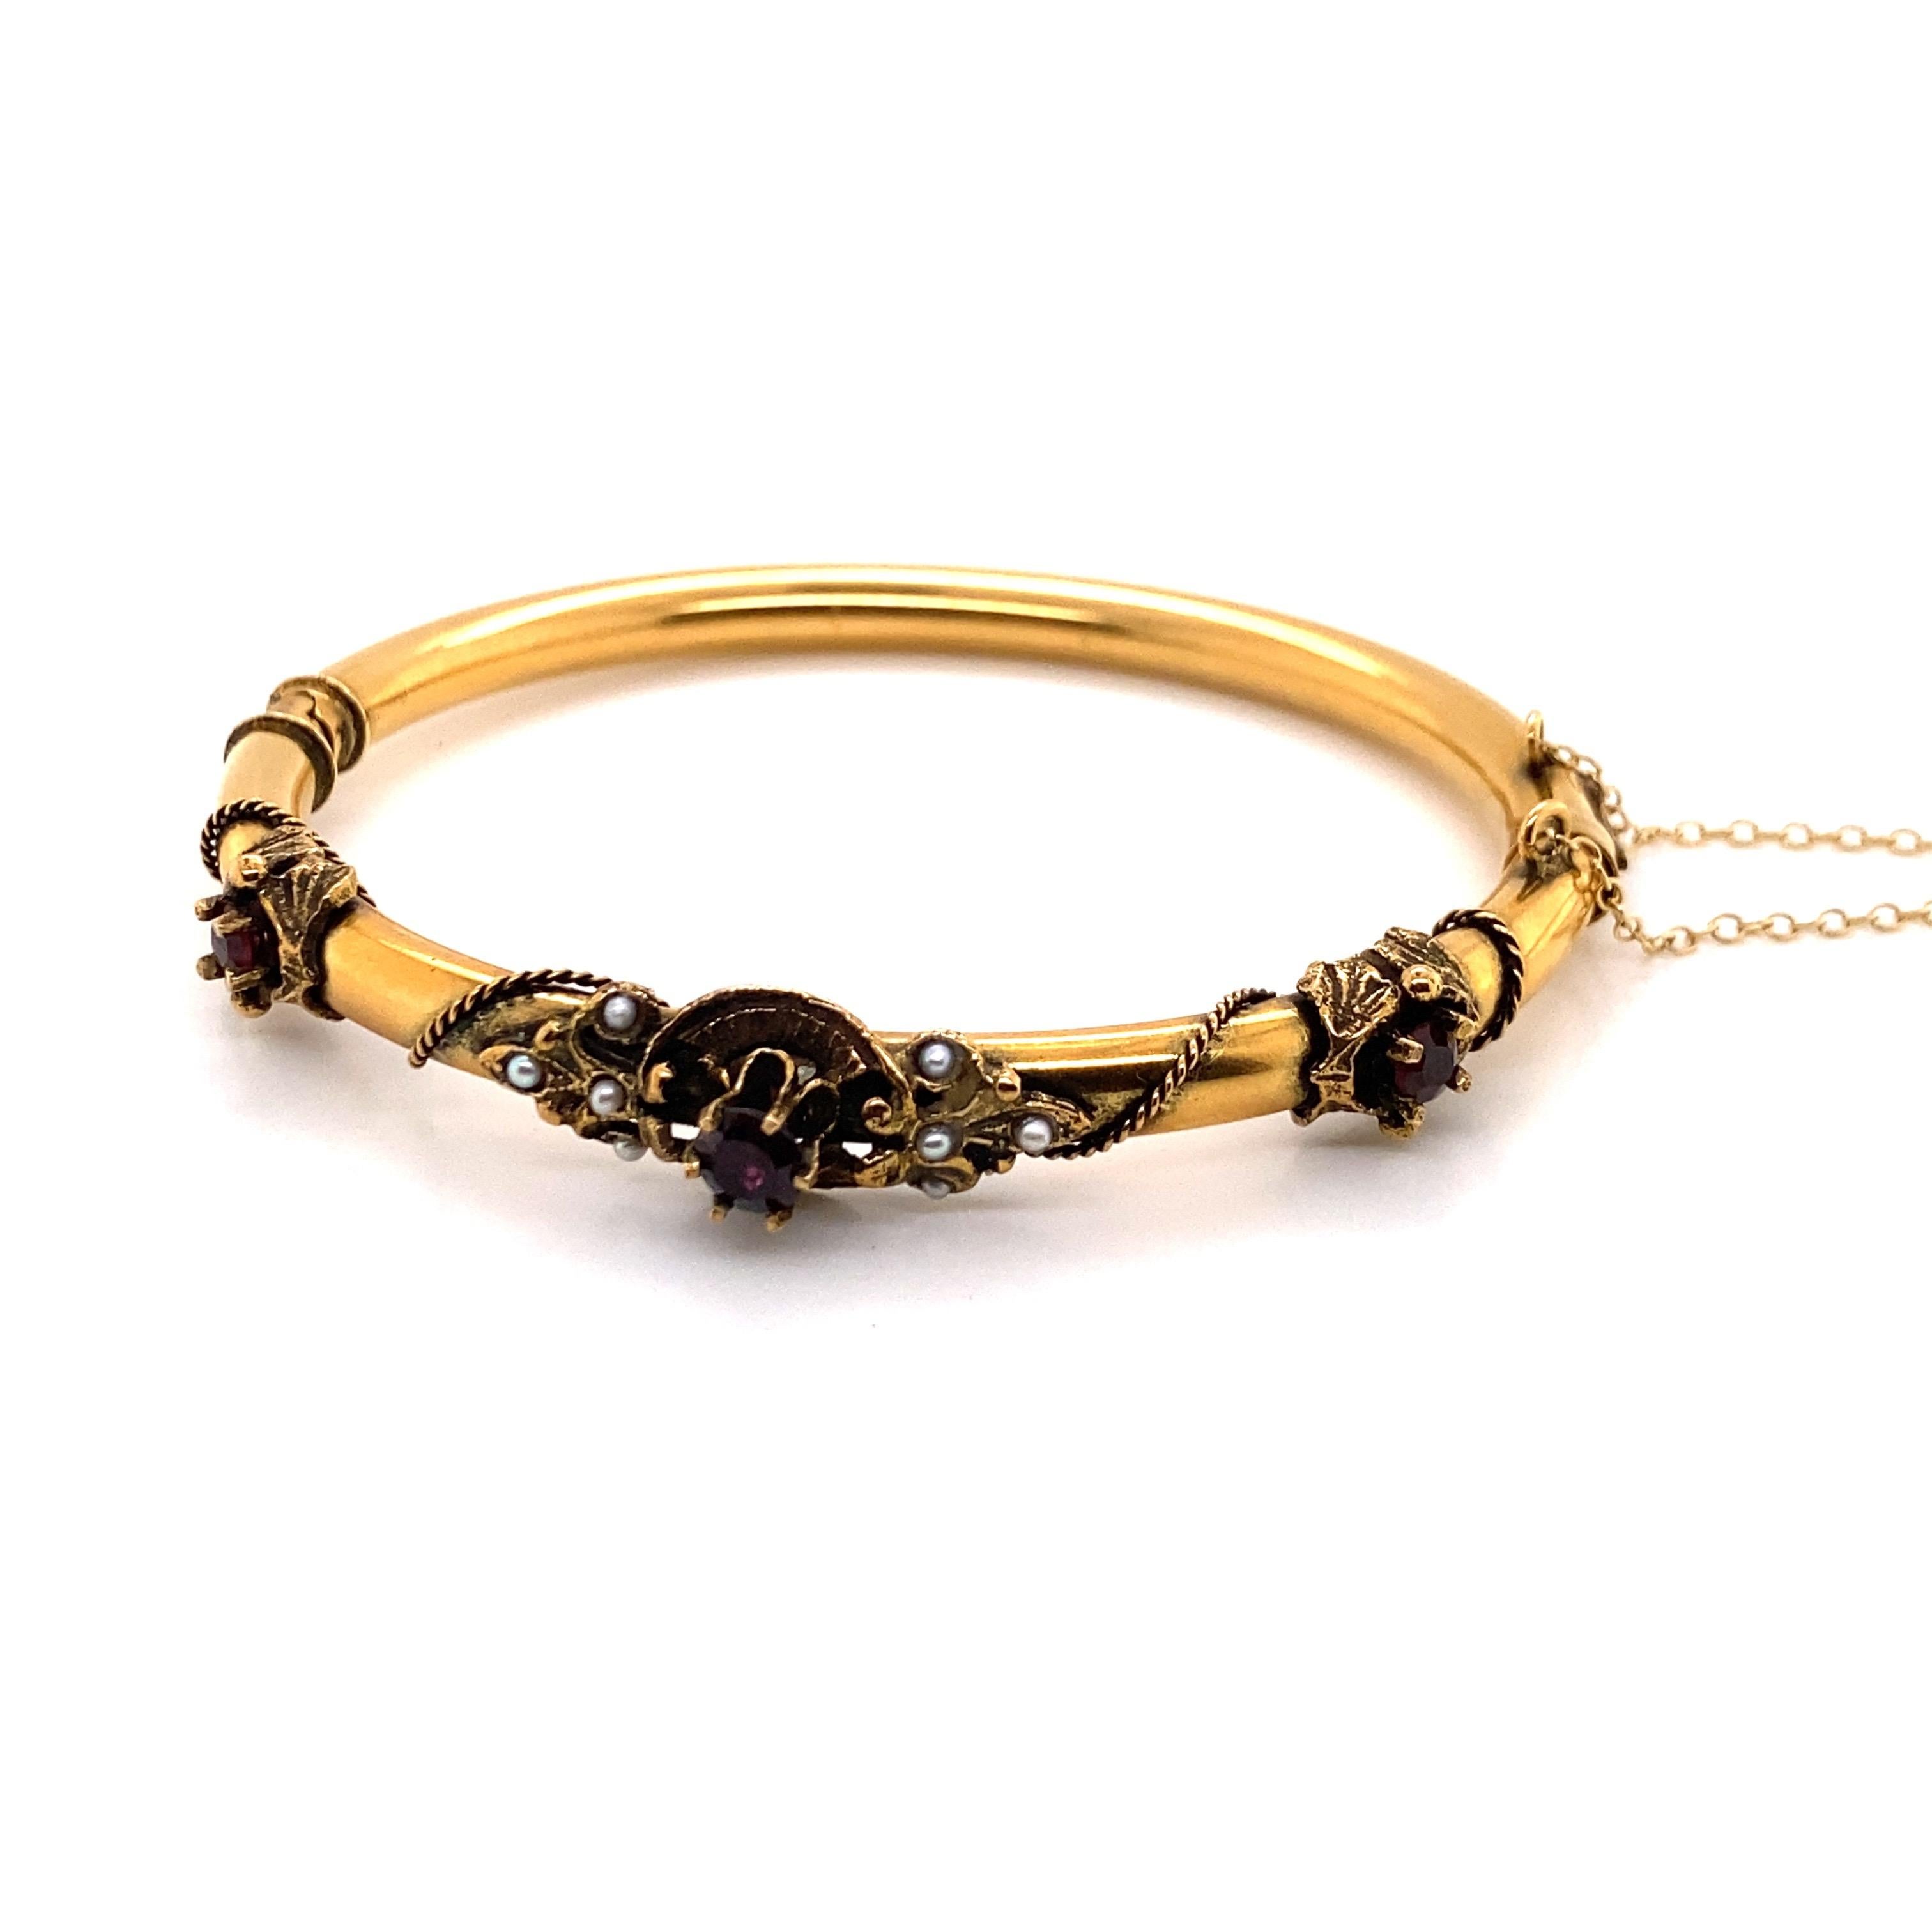 Vintage 14K Yellow Gold Victorian Reproduction Bangle with Garnets and Seed Pearls - The bangle measures 4.7mm wide. The inside diameter is 1.9 inches high and 2.2 inches wide. The bracelets weight is 13.08 grams.